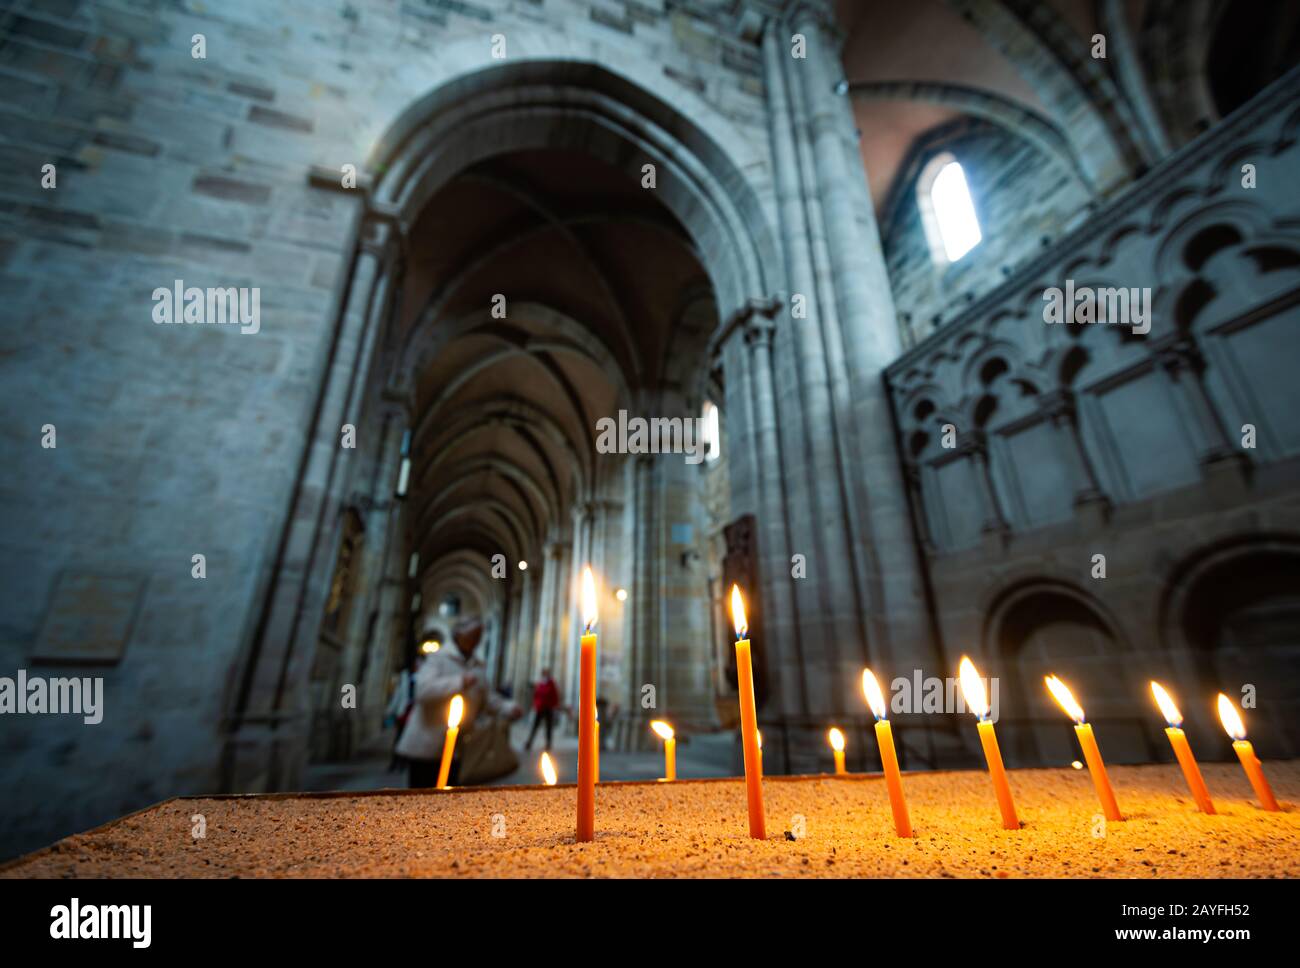 Architecture of beautiful old church in Germany. Candles in foreground and arches in background Stock Photo